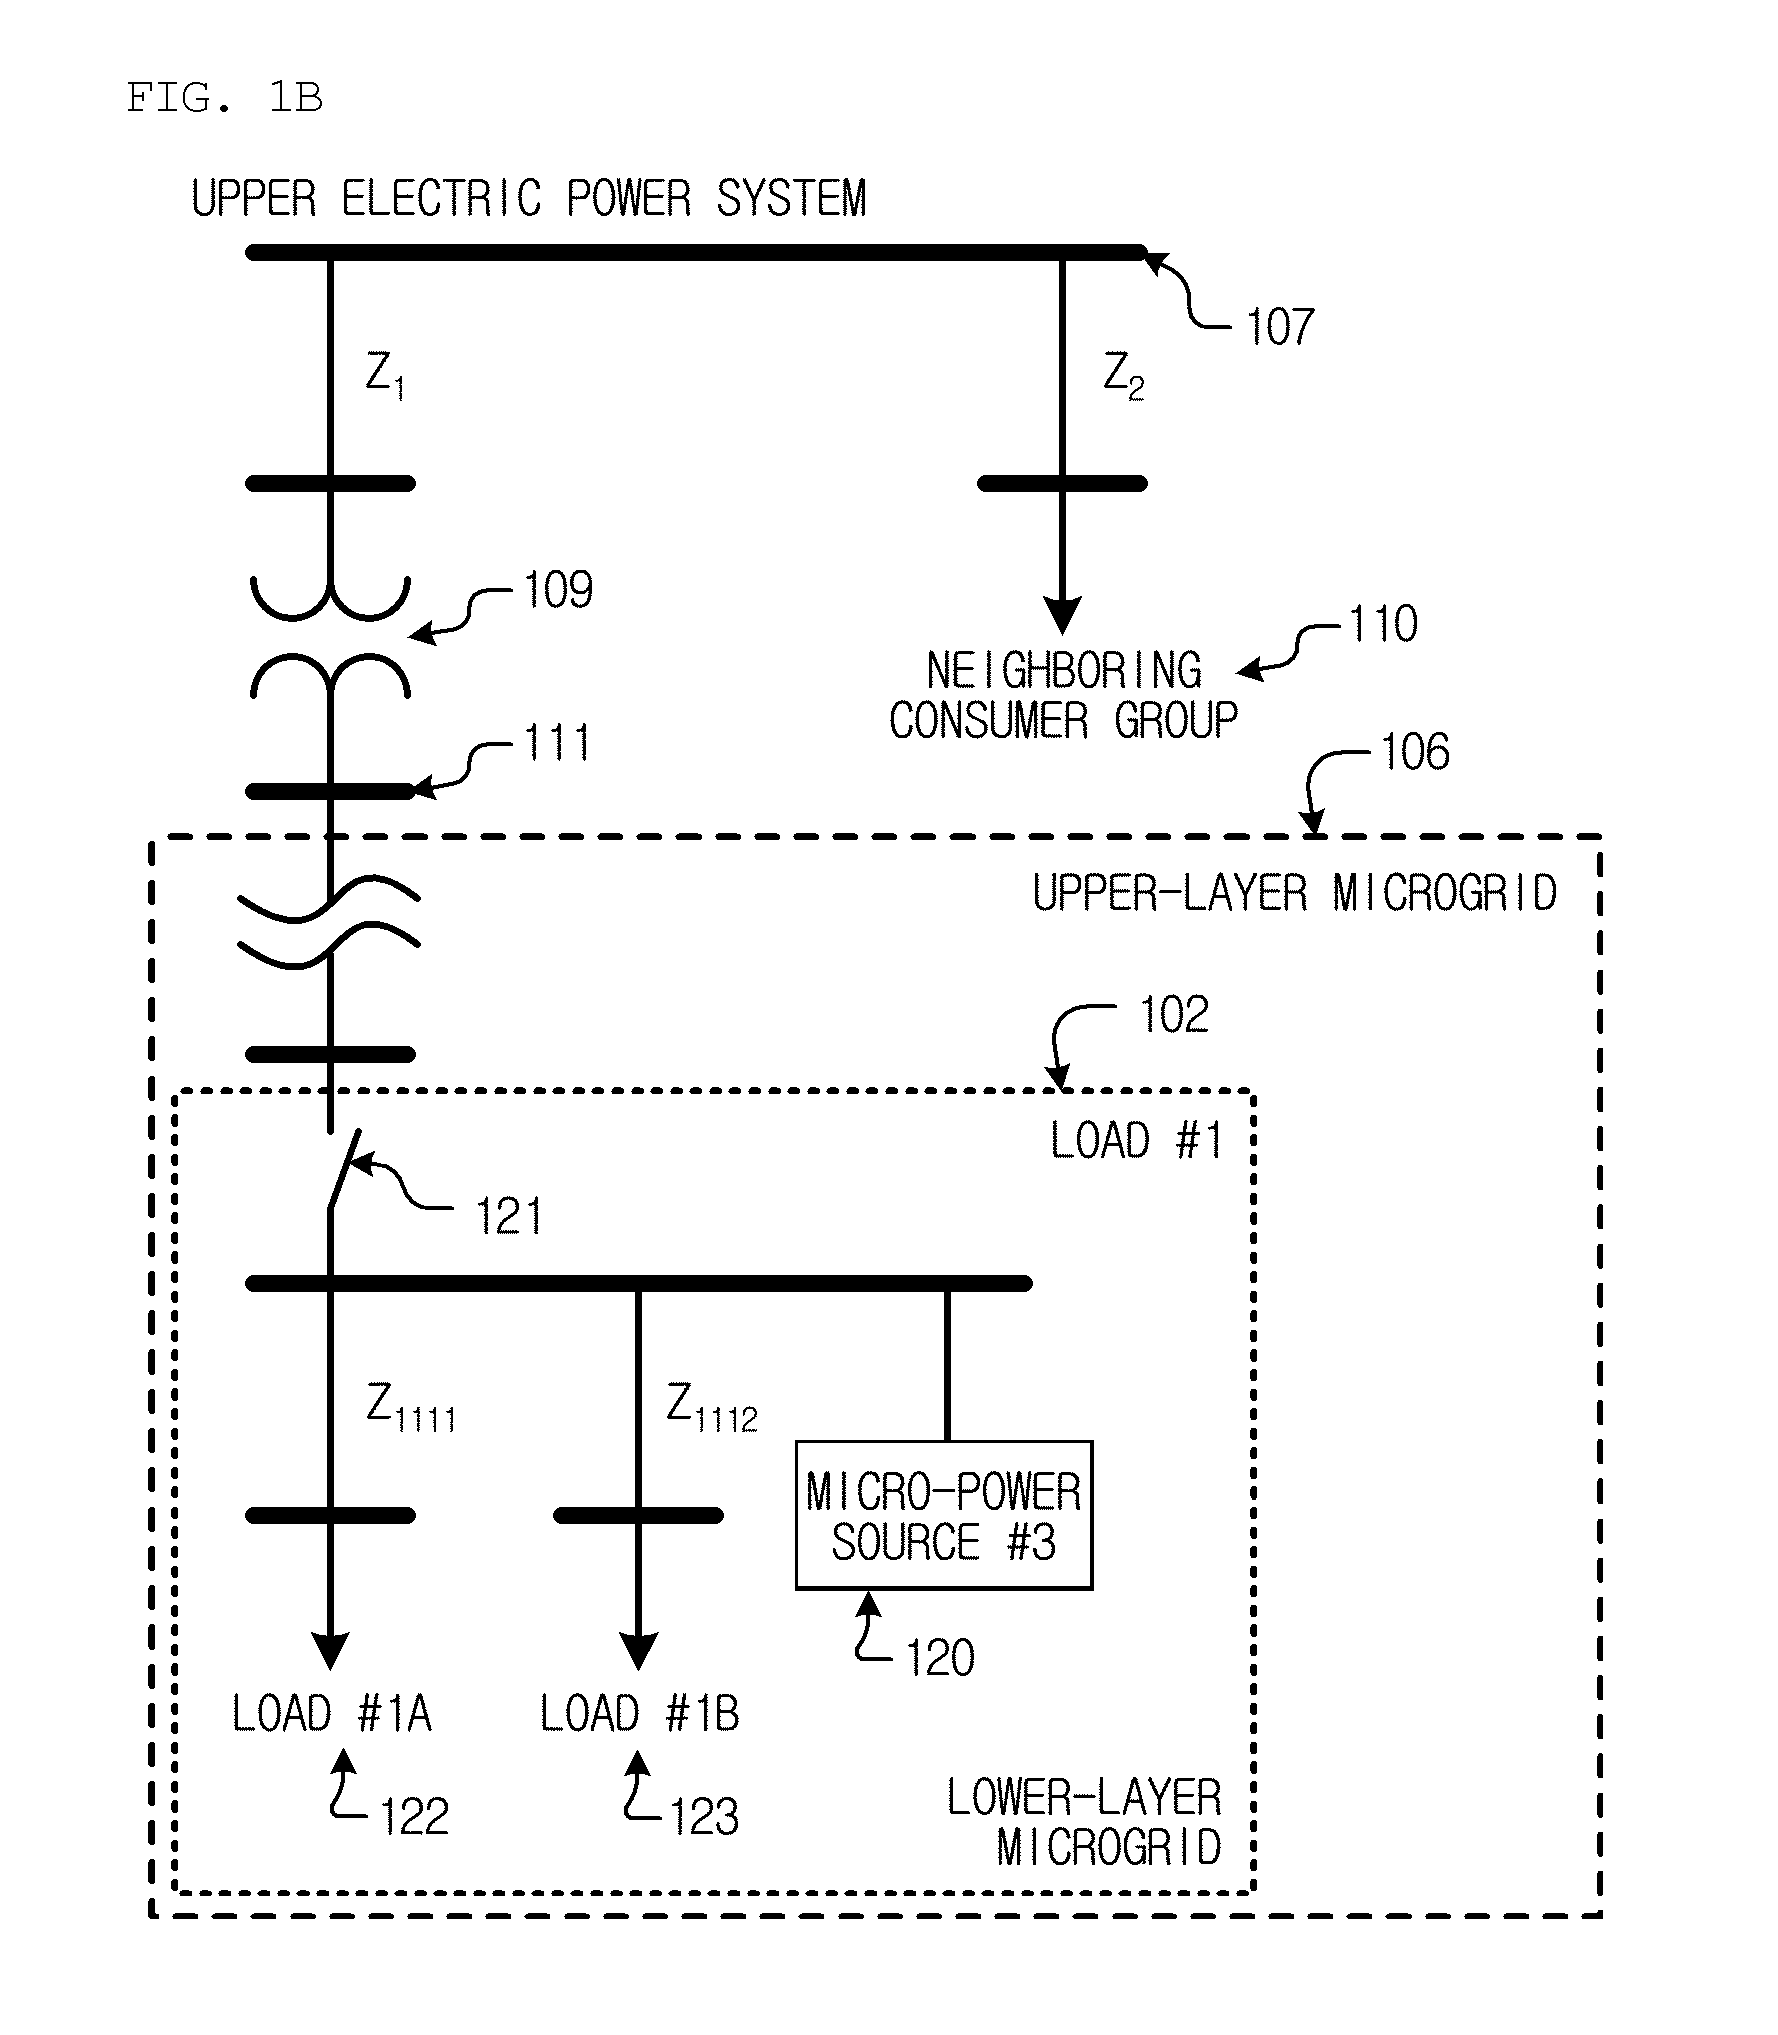 Apparatus and control method of micro-power source for microgrid application